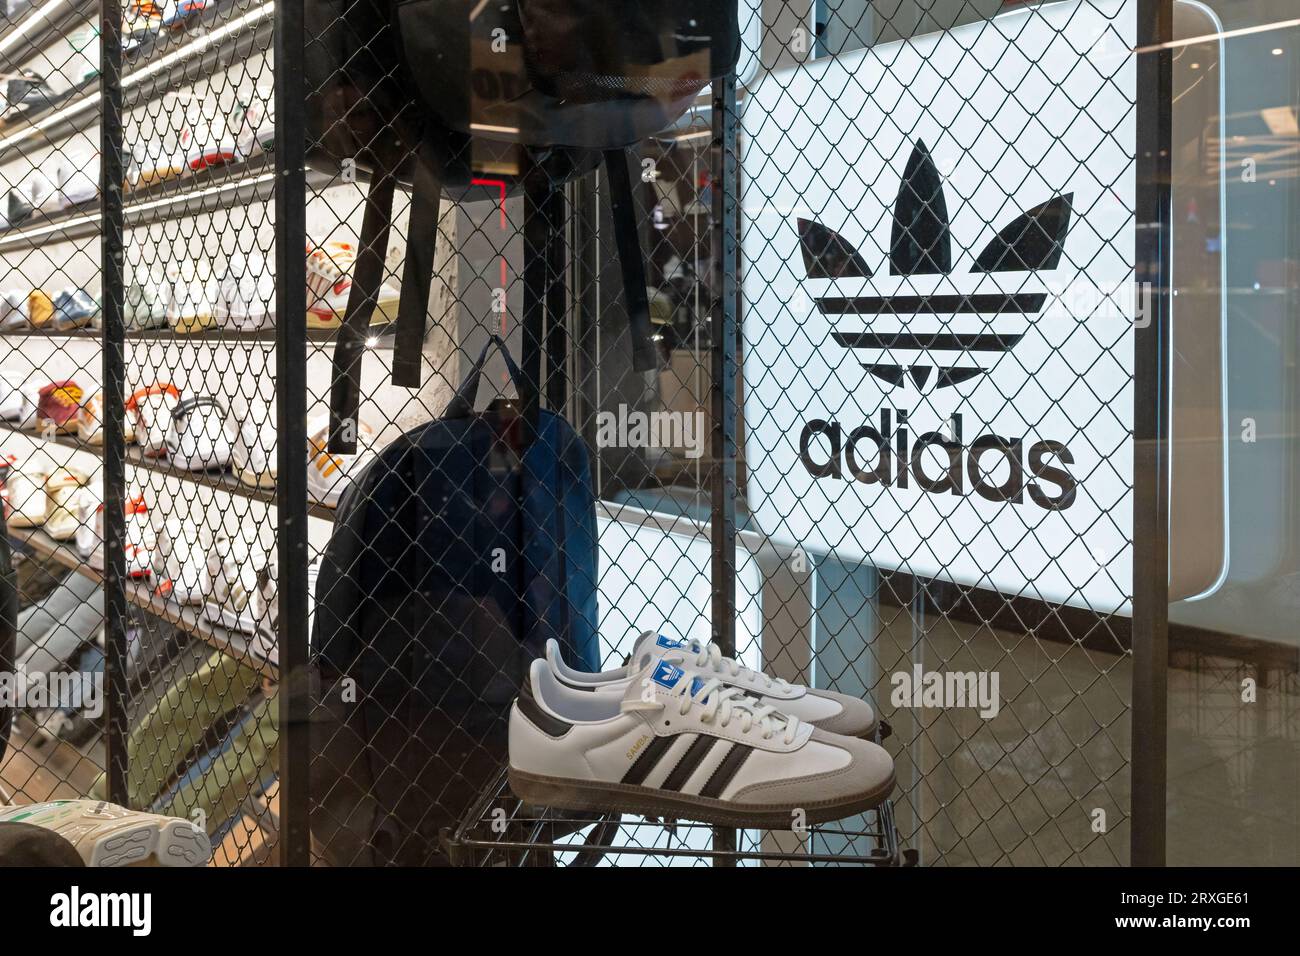 Adidas brand advertising sign and sneakers in the interior of a shoe store. Adidas neon store sign in shop window. Minsk, Belarus, September 18, 2023 Stock Photo